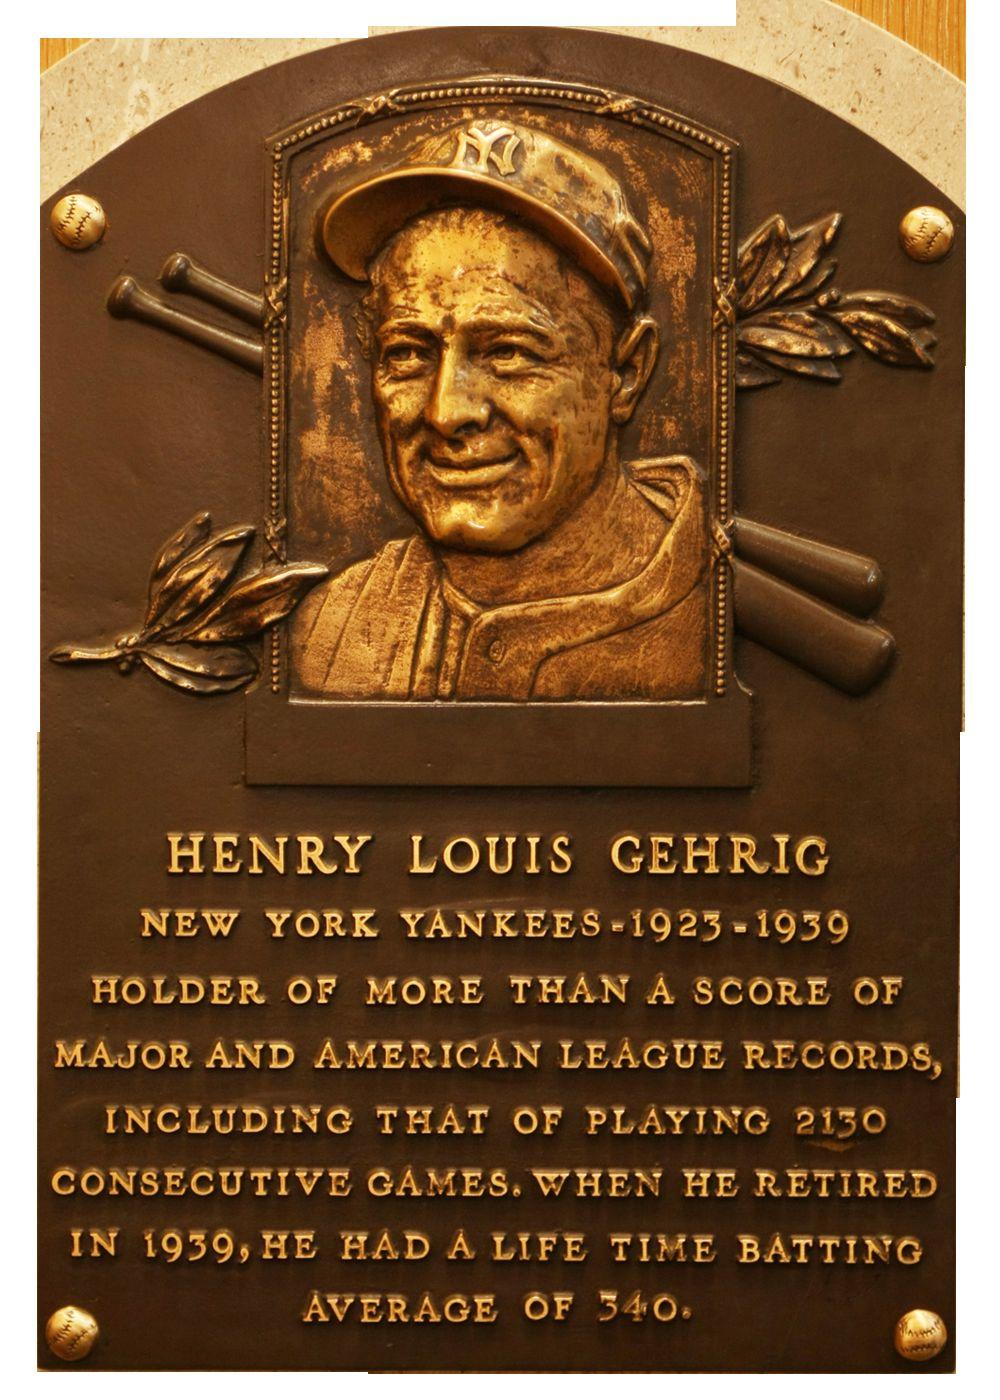 What makes Lou Gehrig s Speech Effective? Gehrig has credibility as a player and American icon.